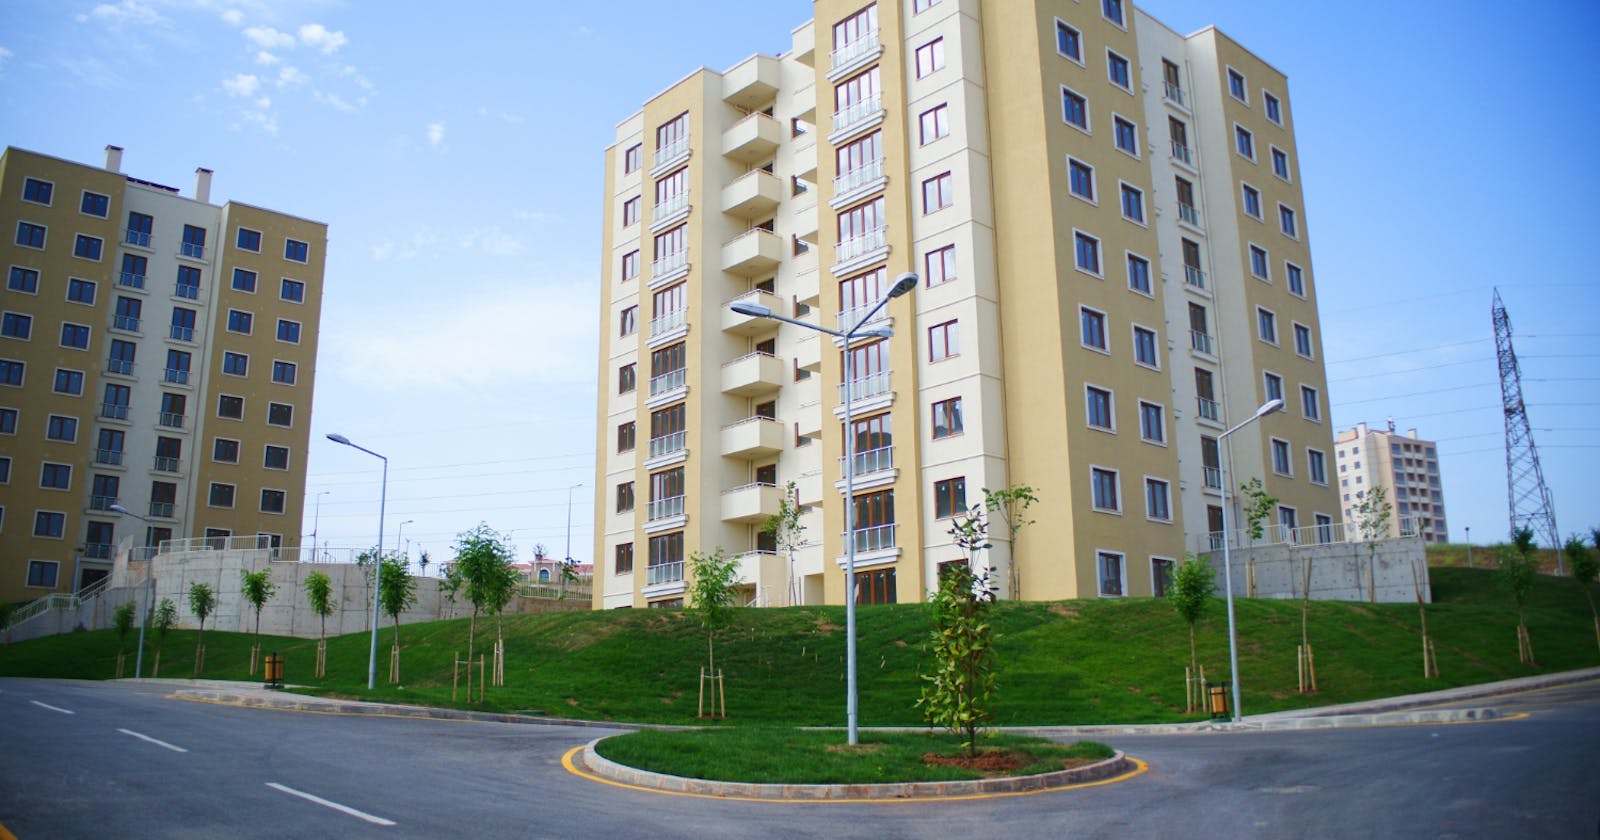 Find Your Dream Independent Flat for Rent in Zirakpur with These Tips